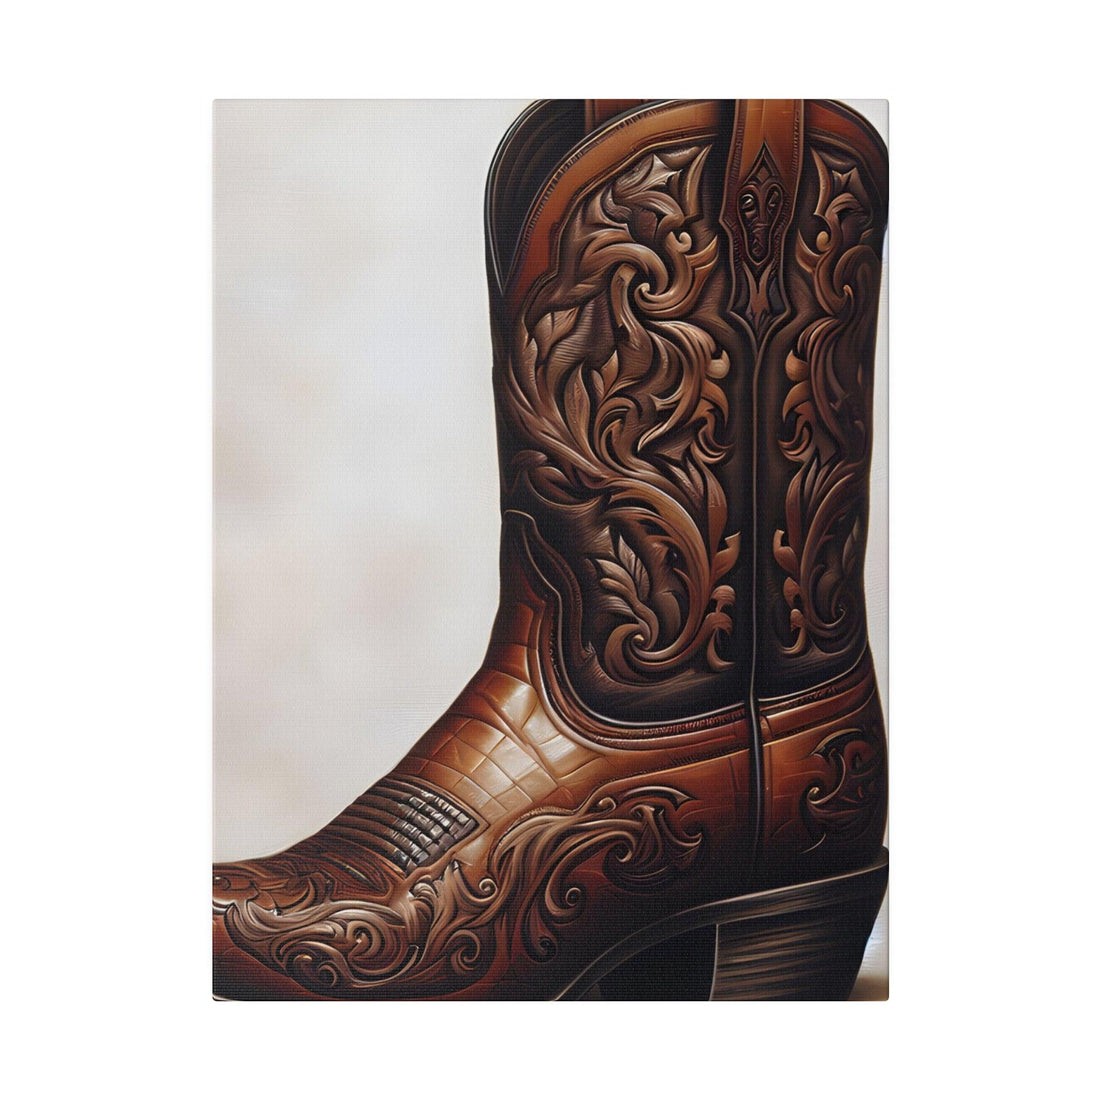 "Rustic Rodeo: Vintage Cowboy Boots Canvas Wall Art" - The Alice Gallery